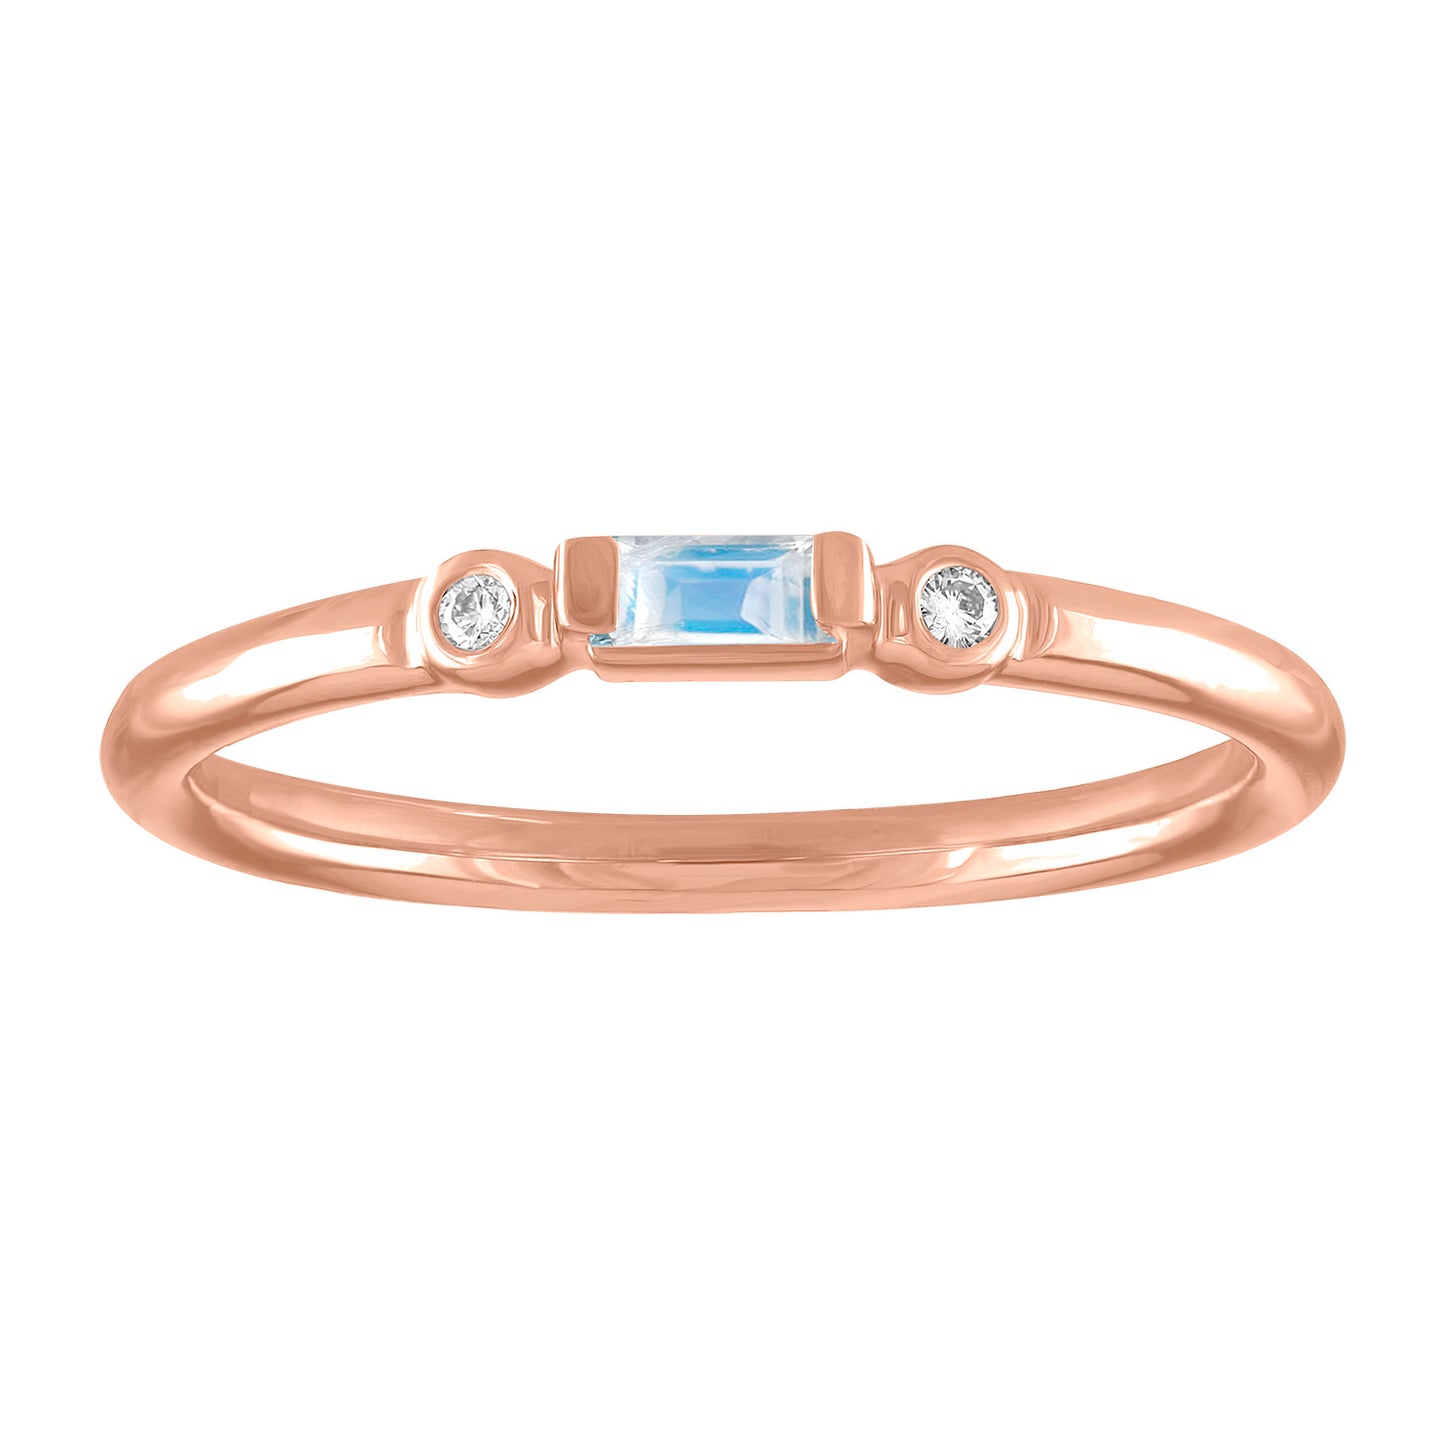 Rose gold skinny band with a moonstone baguette in the center and two round diamonds on the side. 